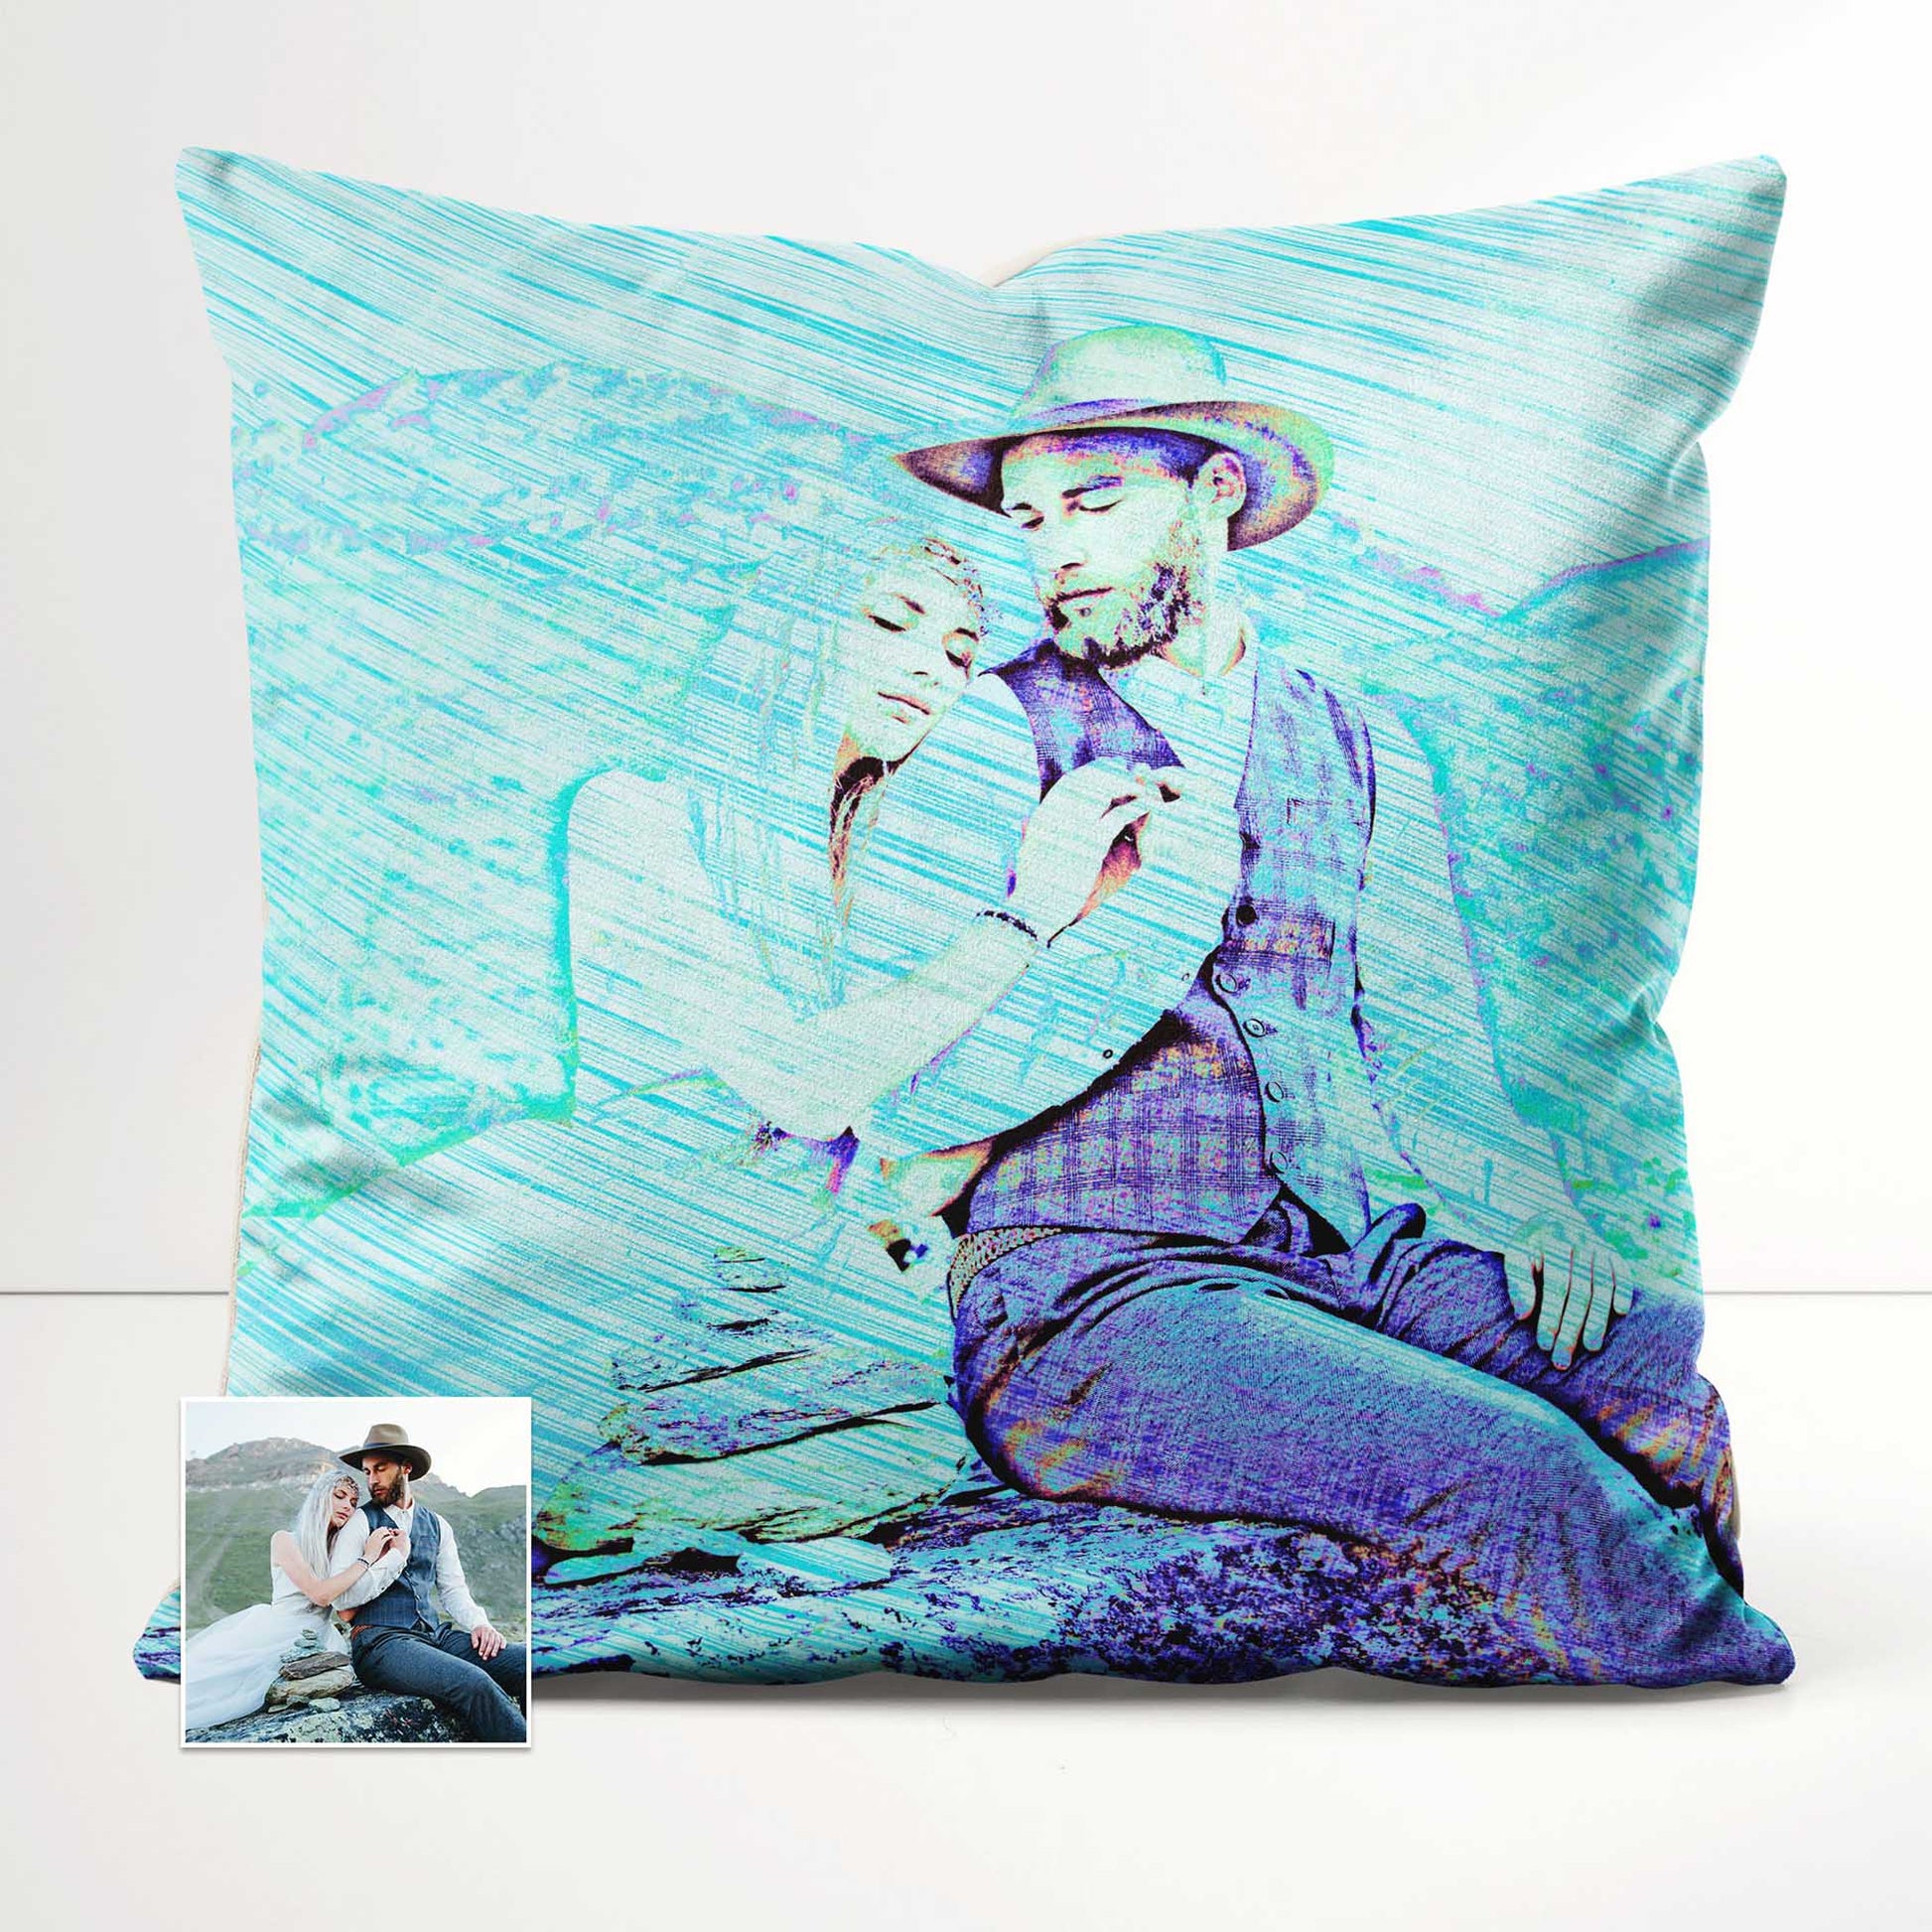 Transform your home decor with the Personalised Blue Drawing Cushion. Its custom drawing, created from your photo, brings a unique and creative touch to any interior. Made from soft velvet fabric, this cushion offers a luxurious comfort